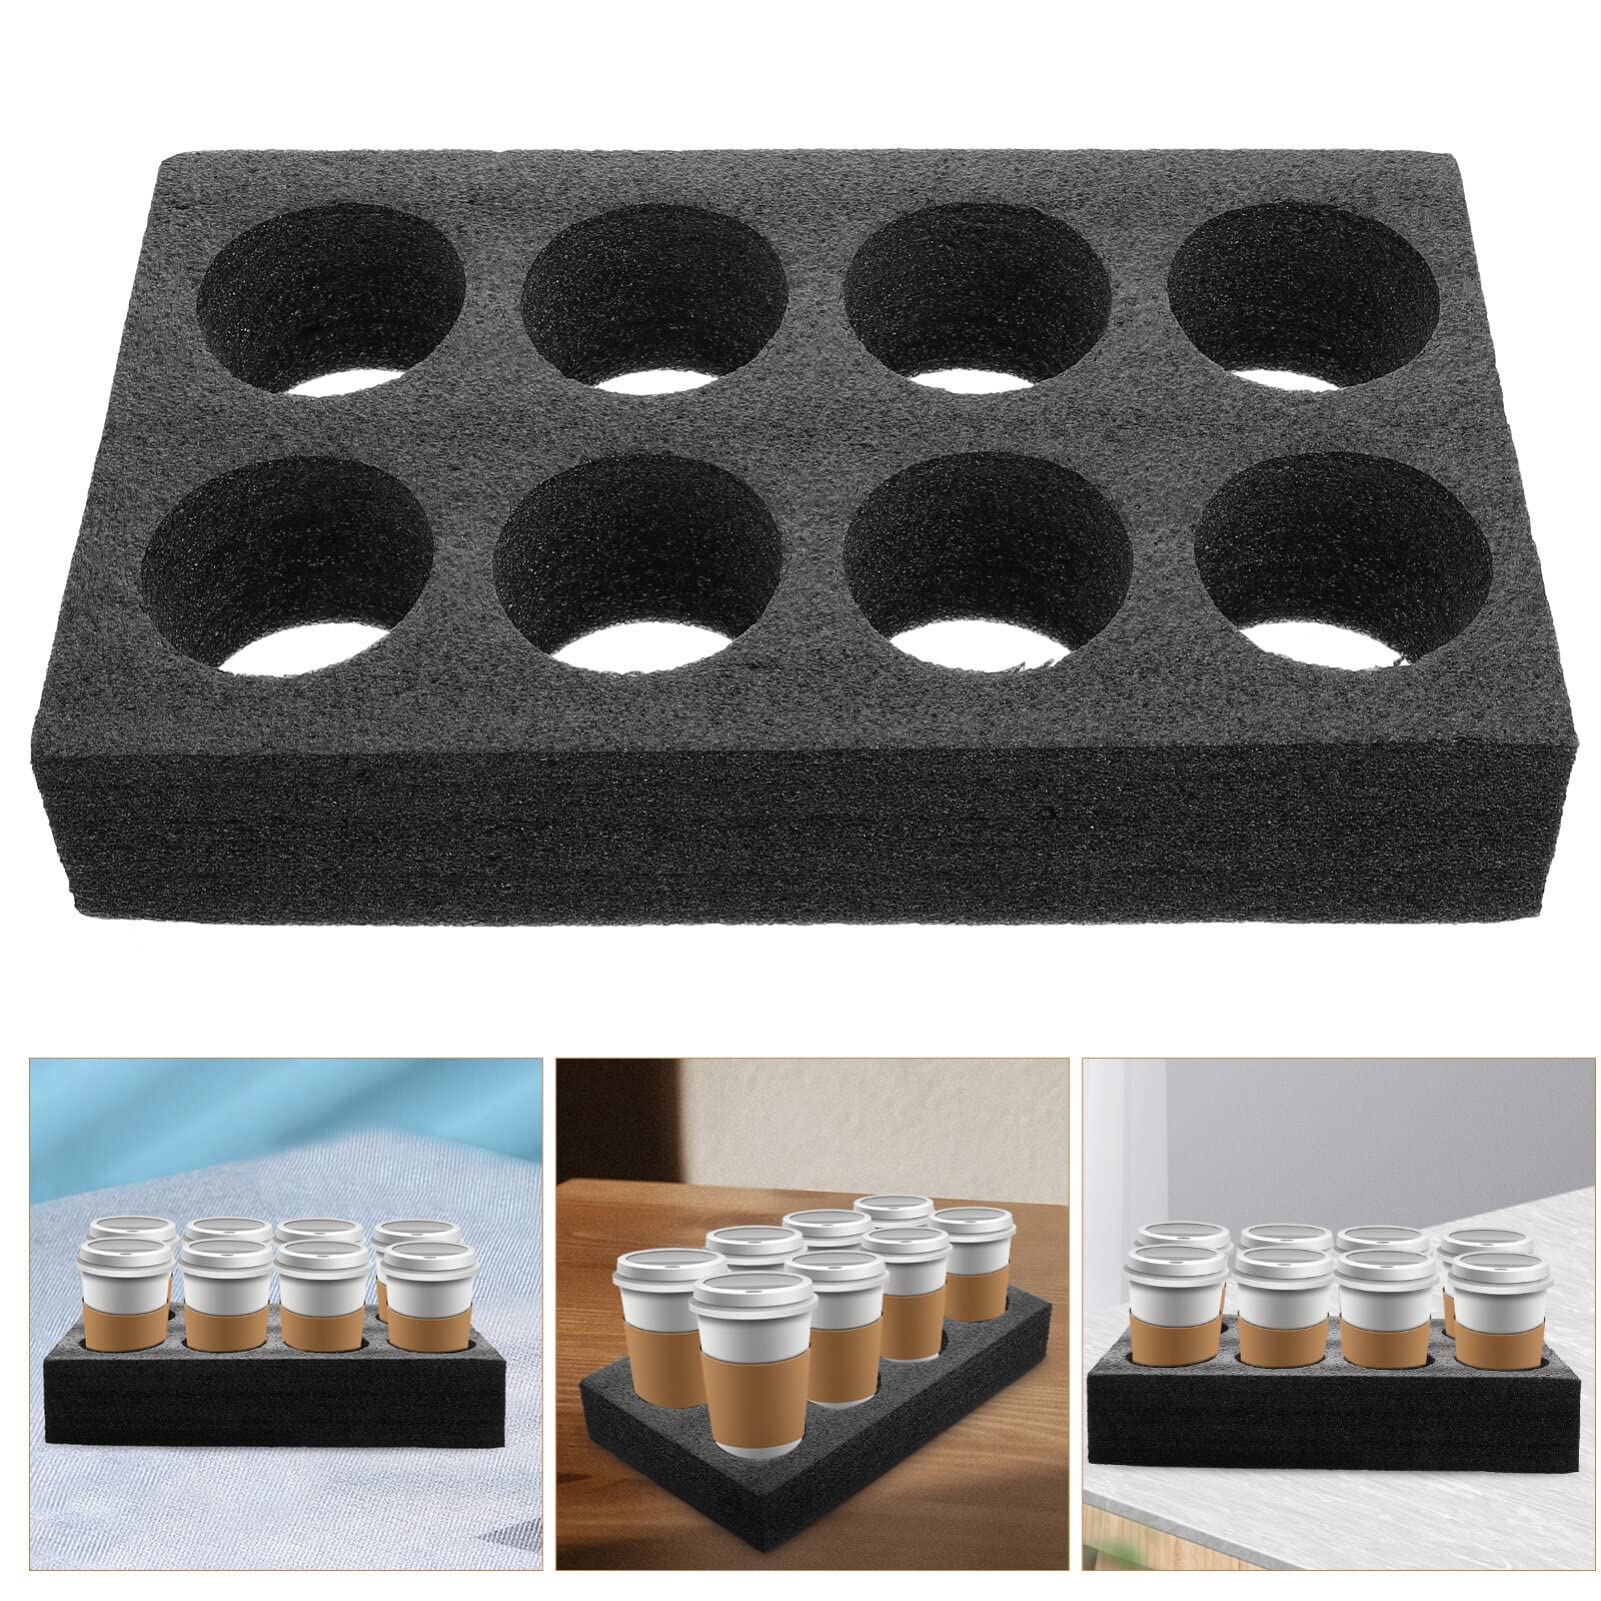 Didiseaon Multi- Hole Cup Holder Foam Cup Holder 8 Holes Universal Multifunction Drink Carrier for Restaurant Tray, Take Out Beverage Coffee Carrier Packing Tool Cup Fixing Holder